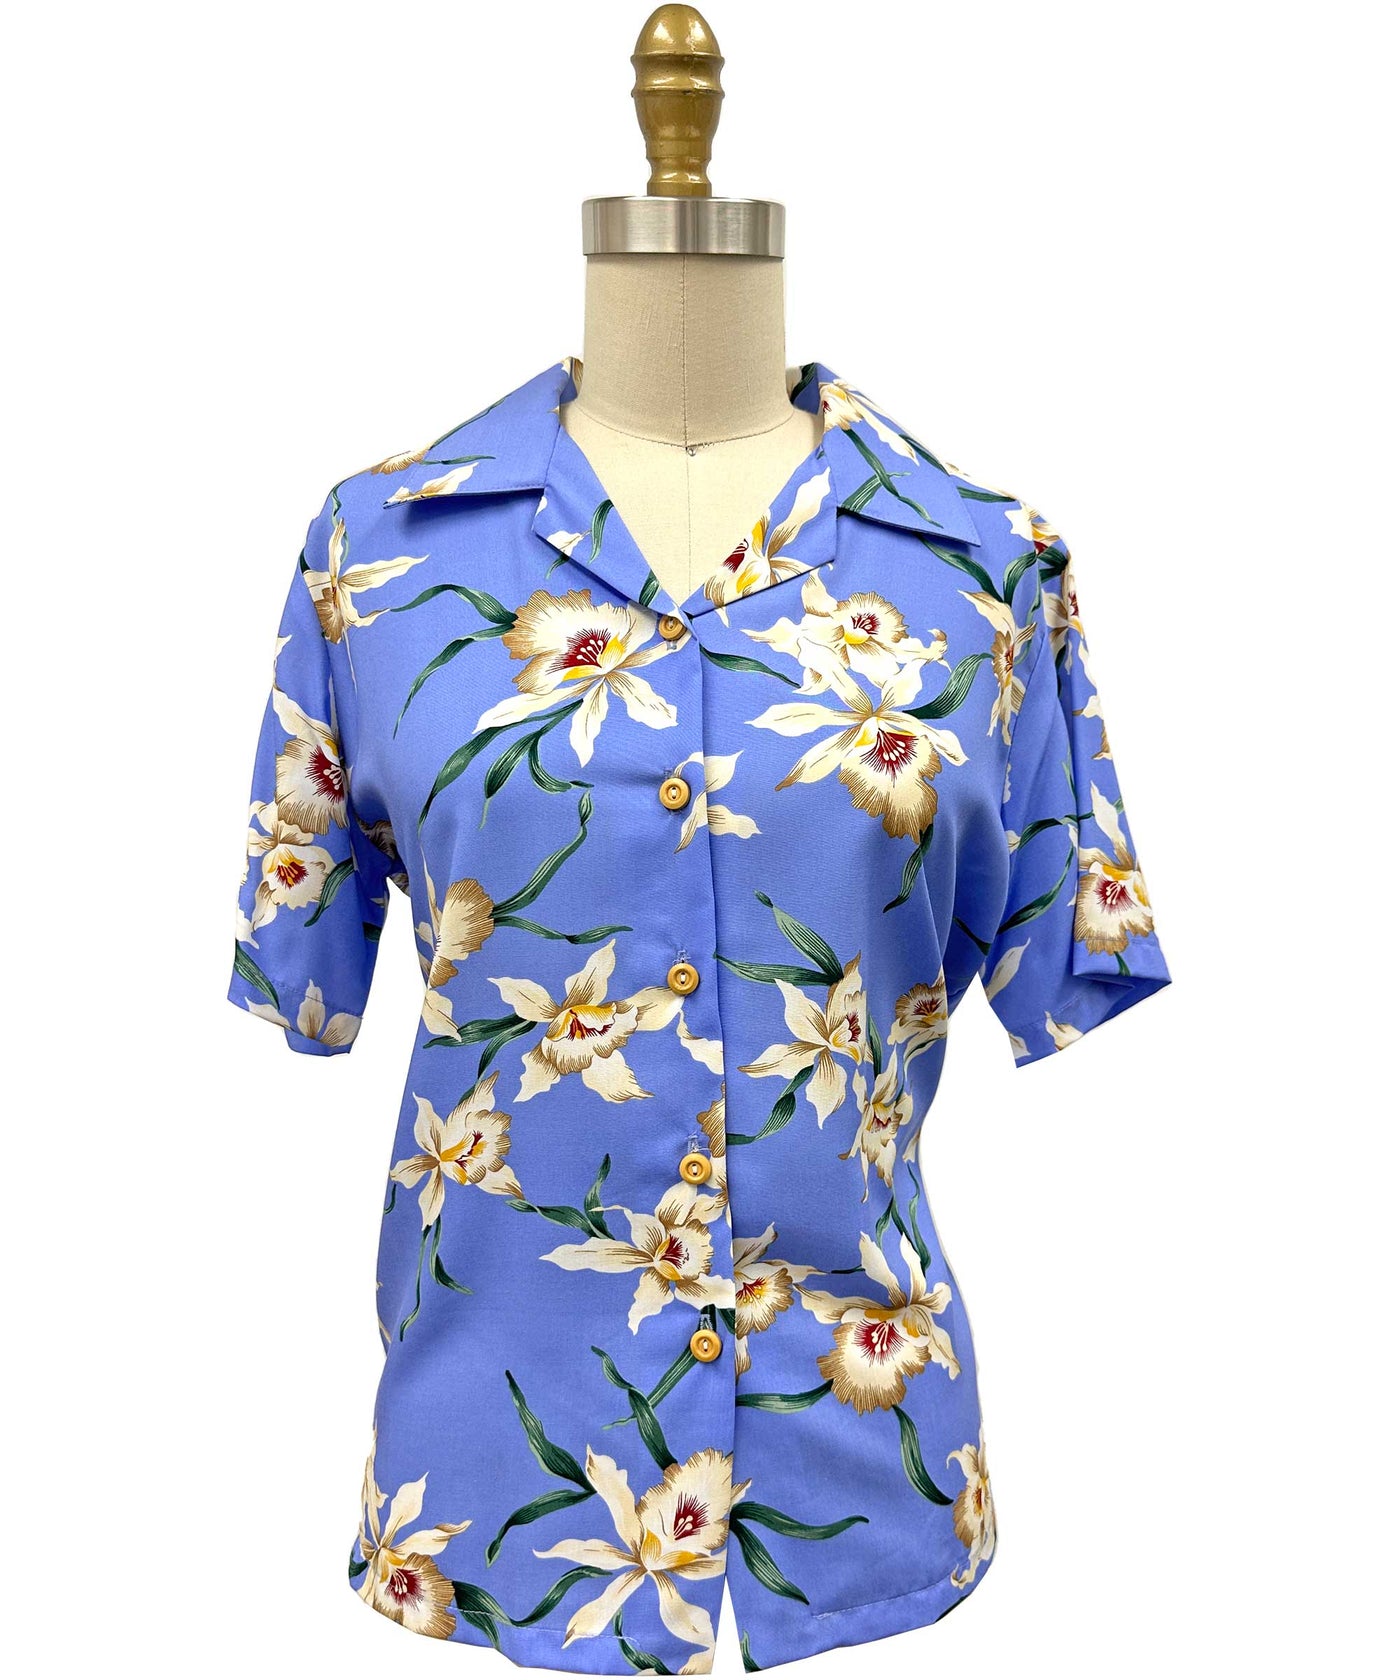 Ladies Star Orchid Periwinkle Camp Shirt